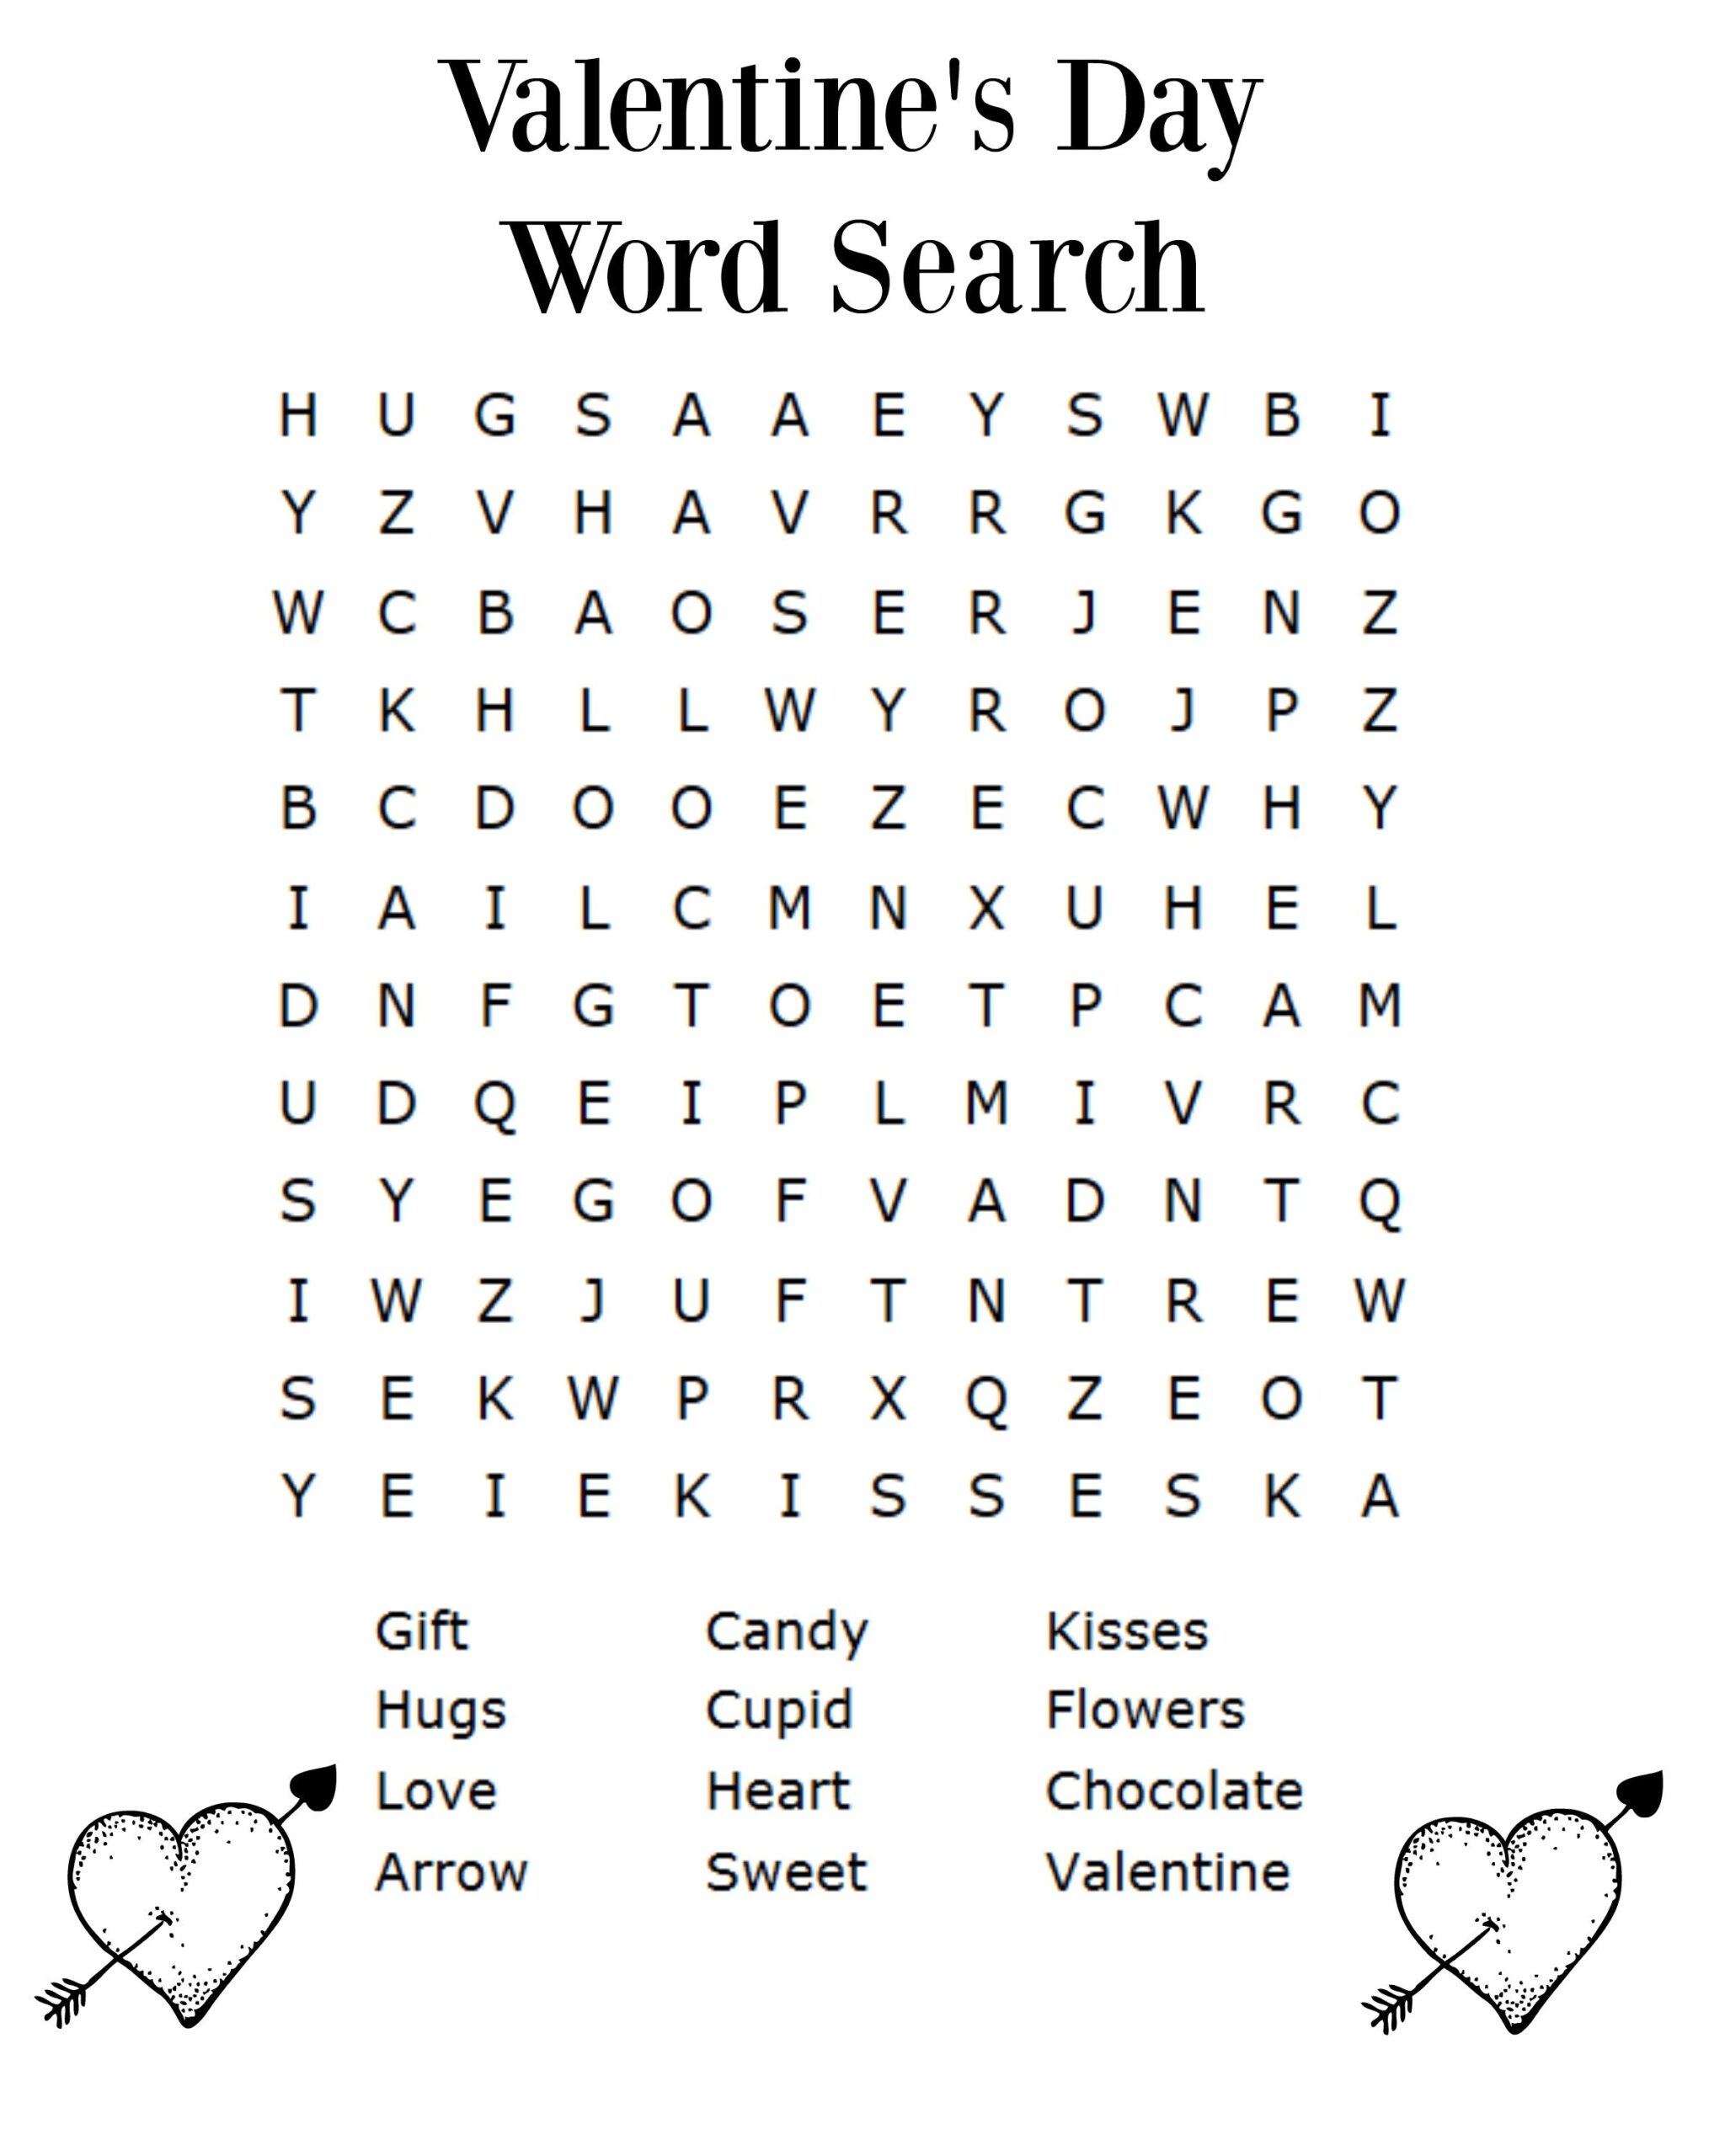 free-valentines-day-word-search-word-search-printable